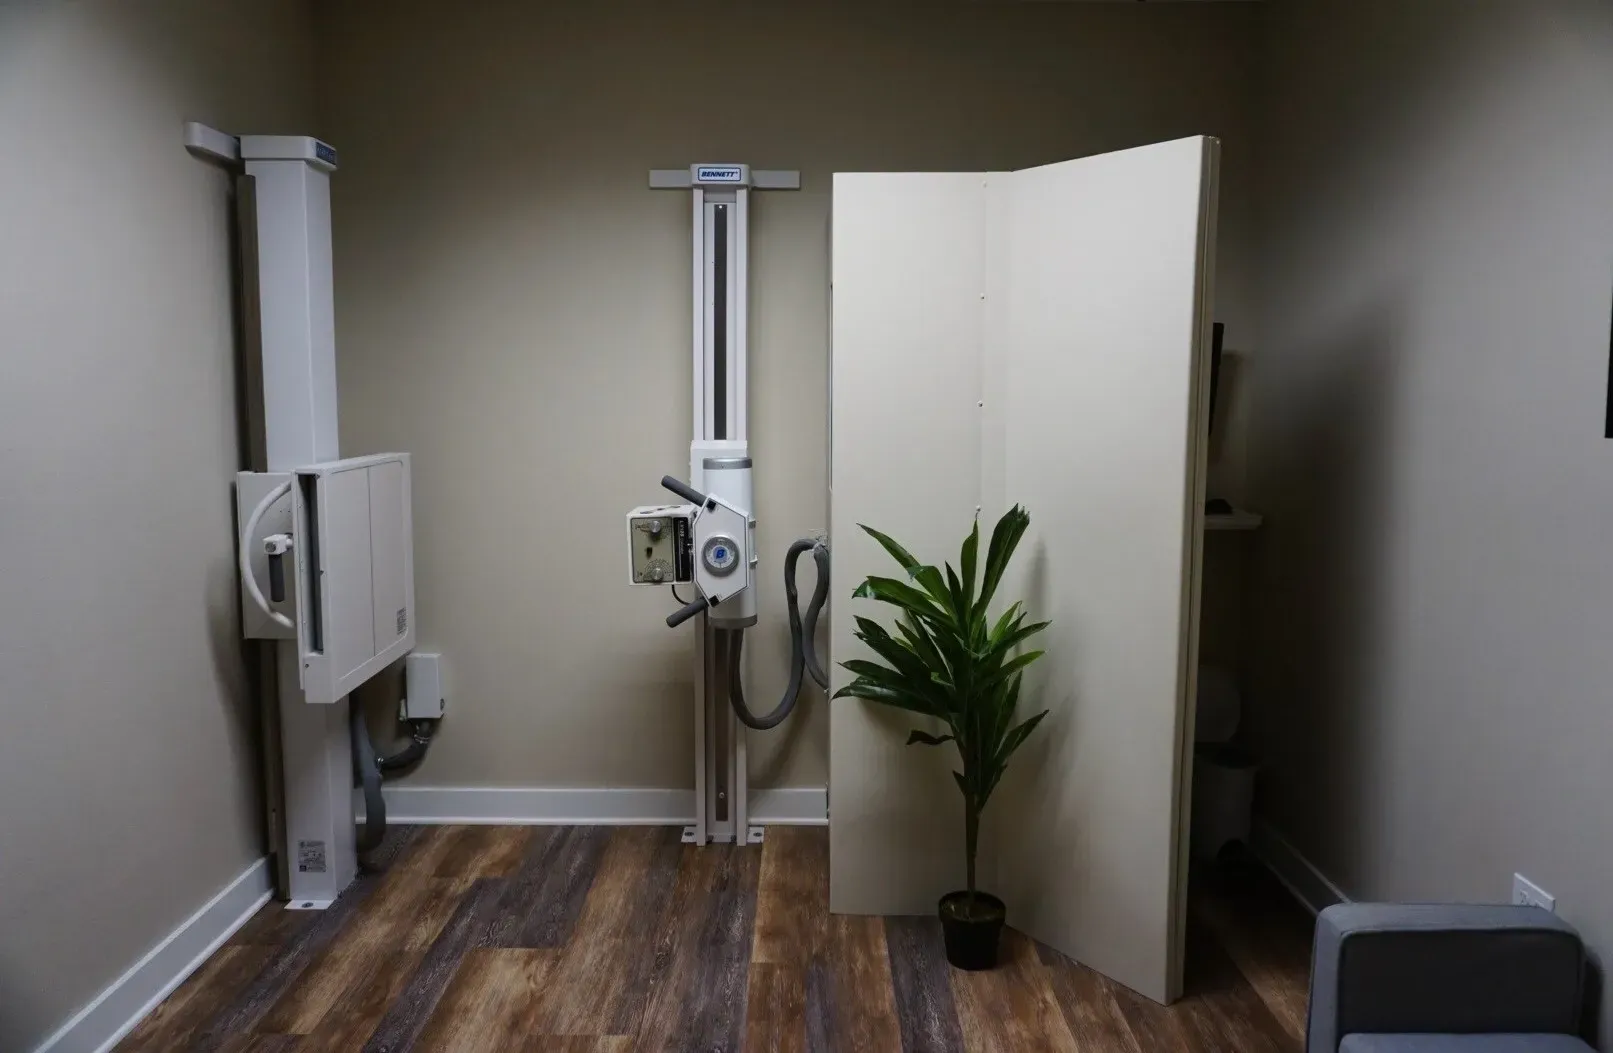 A bathroom with a plant and toilet paper.